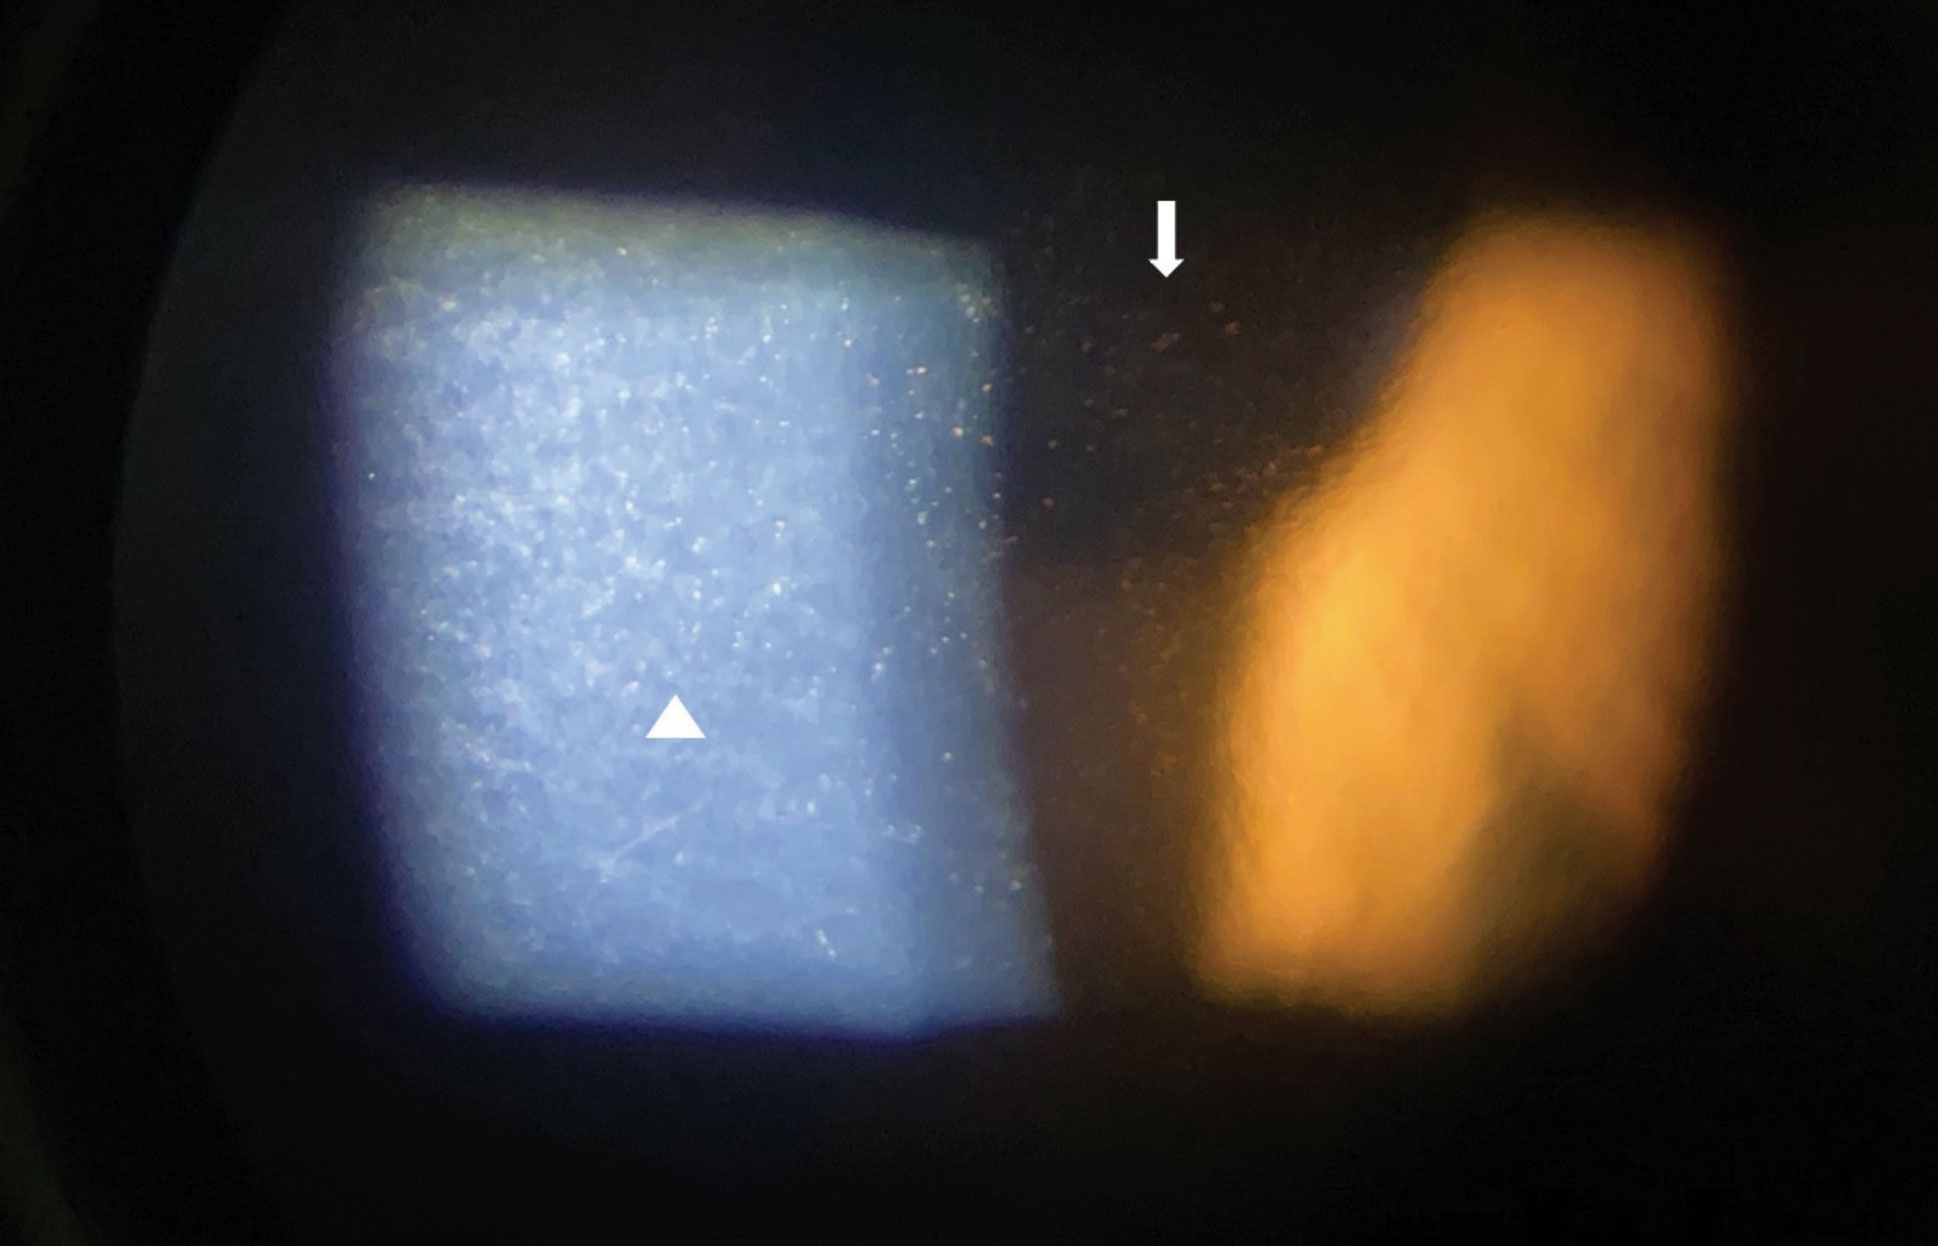 Slit lamp imaging through an iPhone X of pigmented corneal guttata in a patient with Fuchs’ endothelial dystrophy with lesions viewed in high magnification in direct (triangle) and indirect (arrow) illumination.